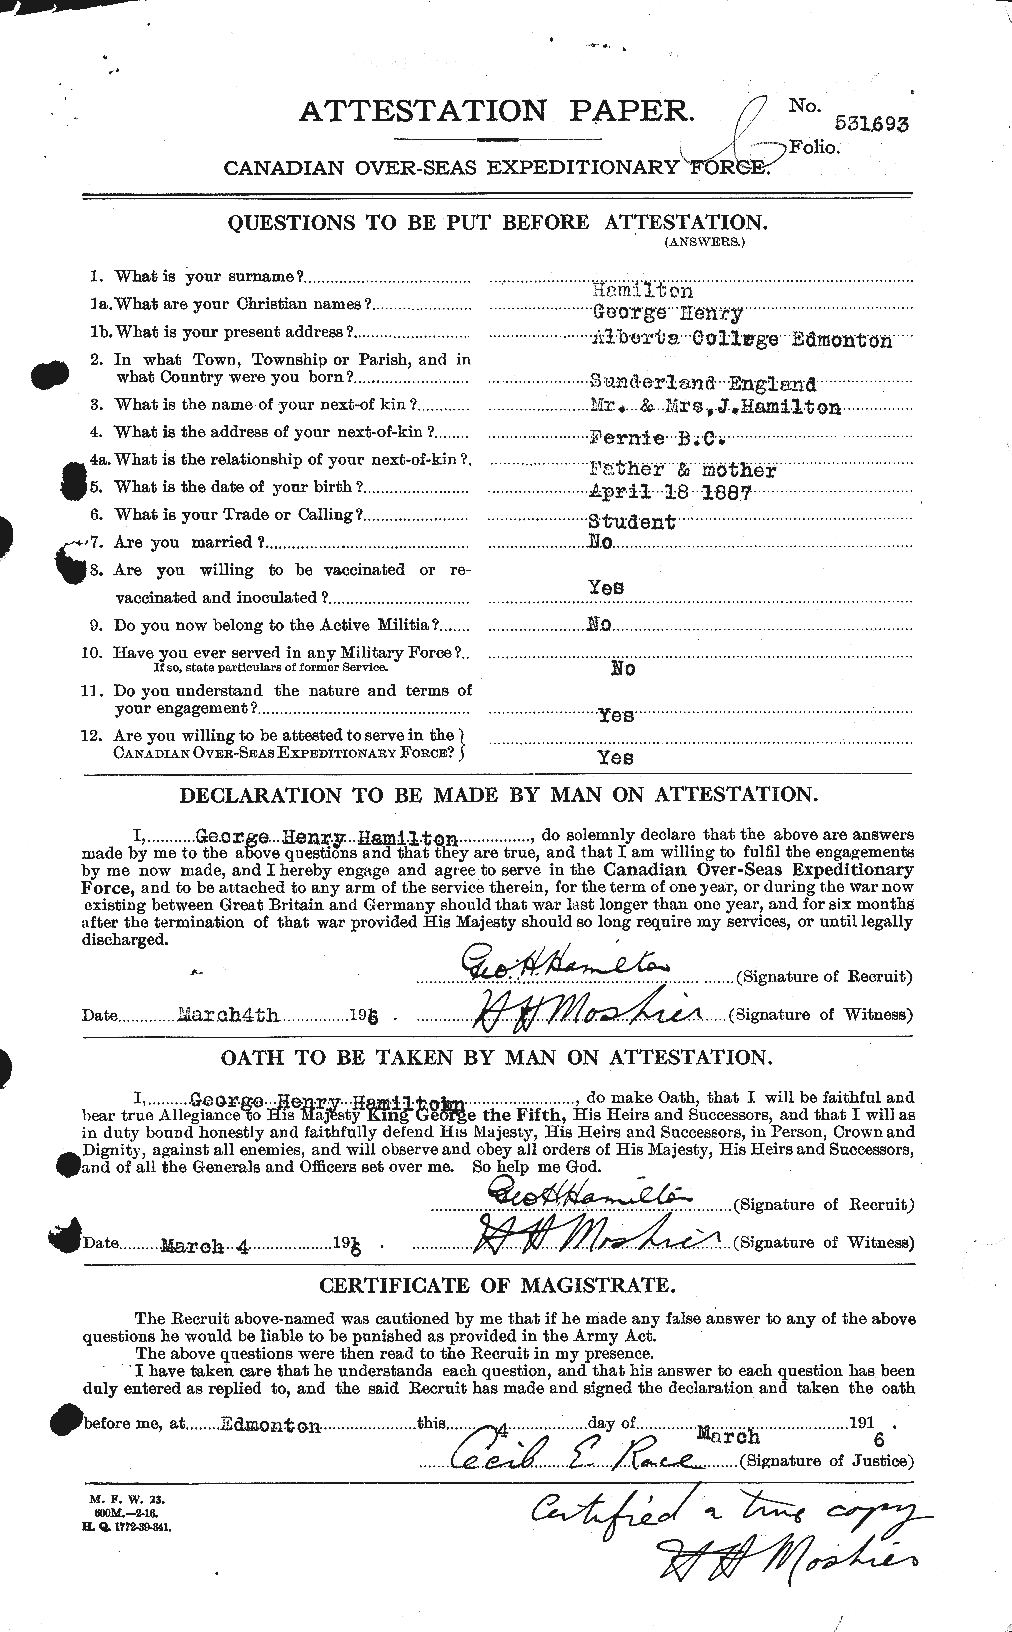 Personnel Records of the First World War - CEF 372463a